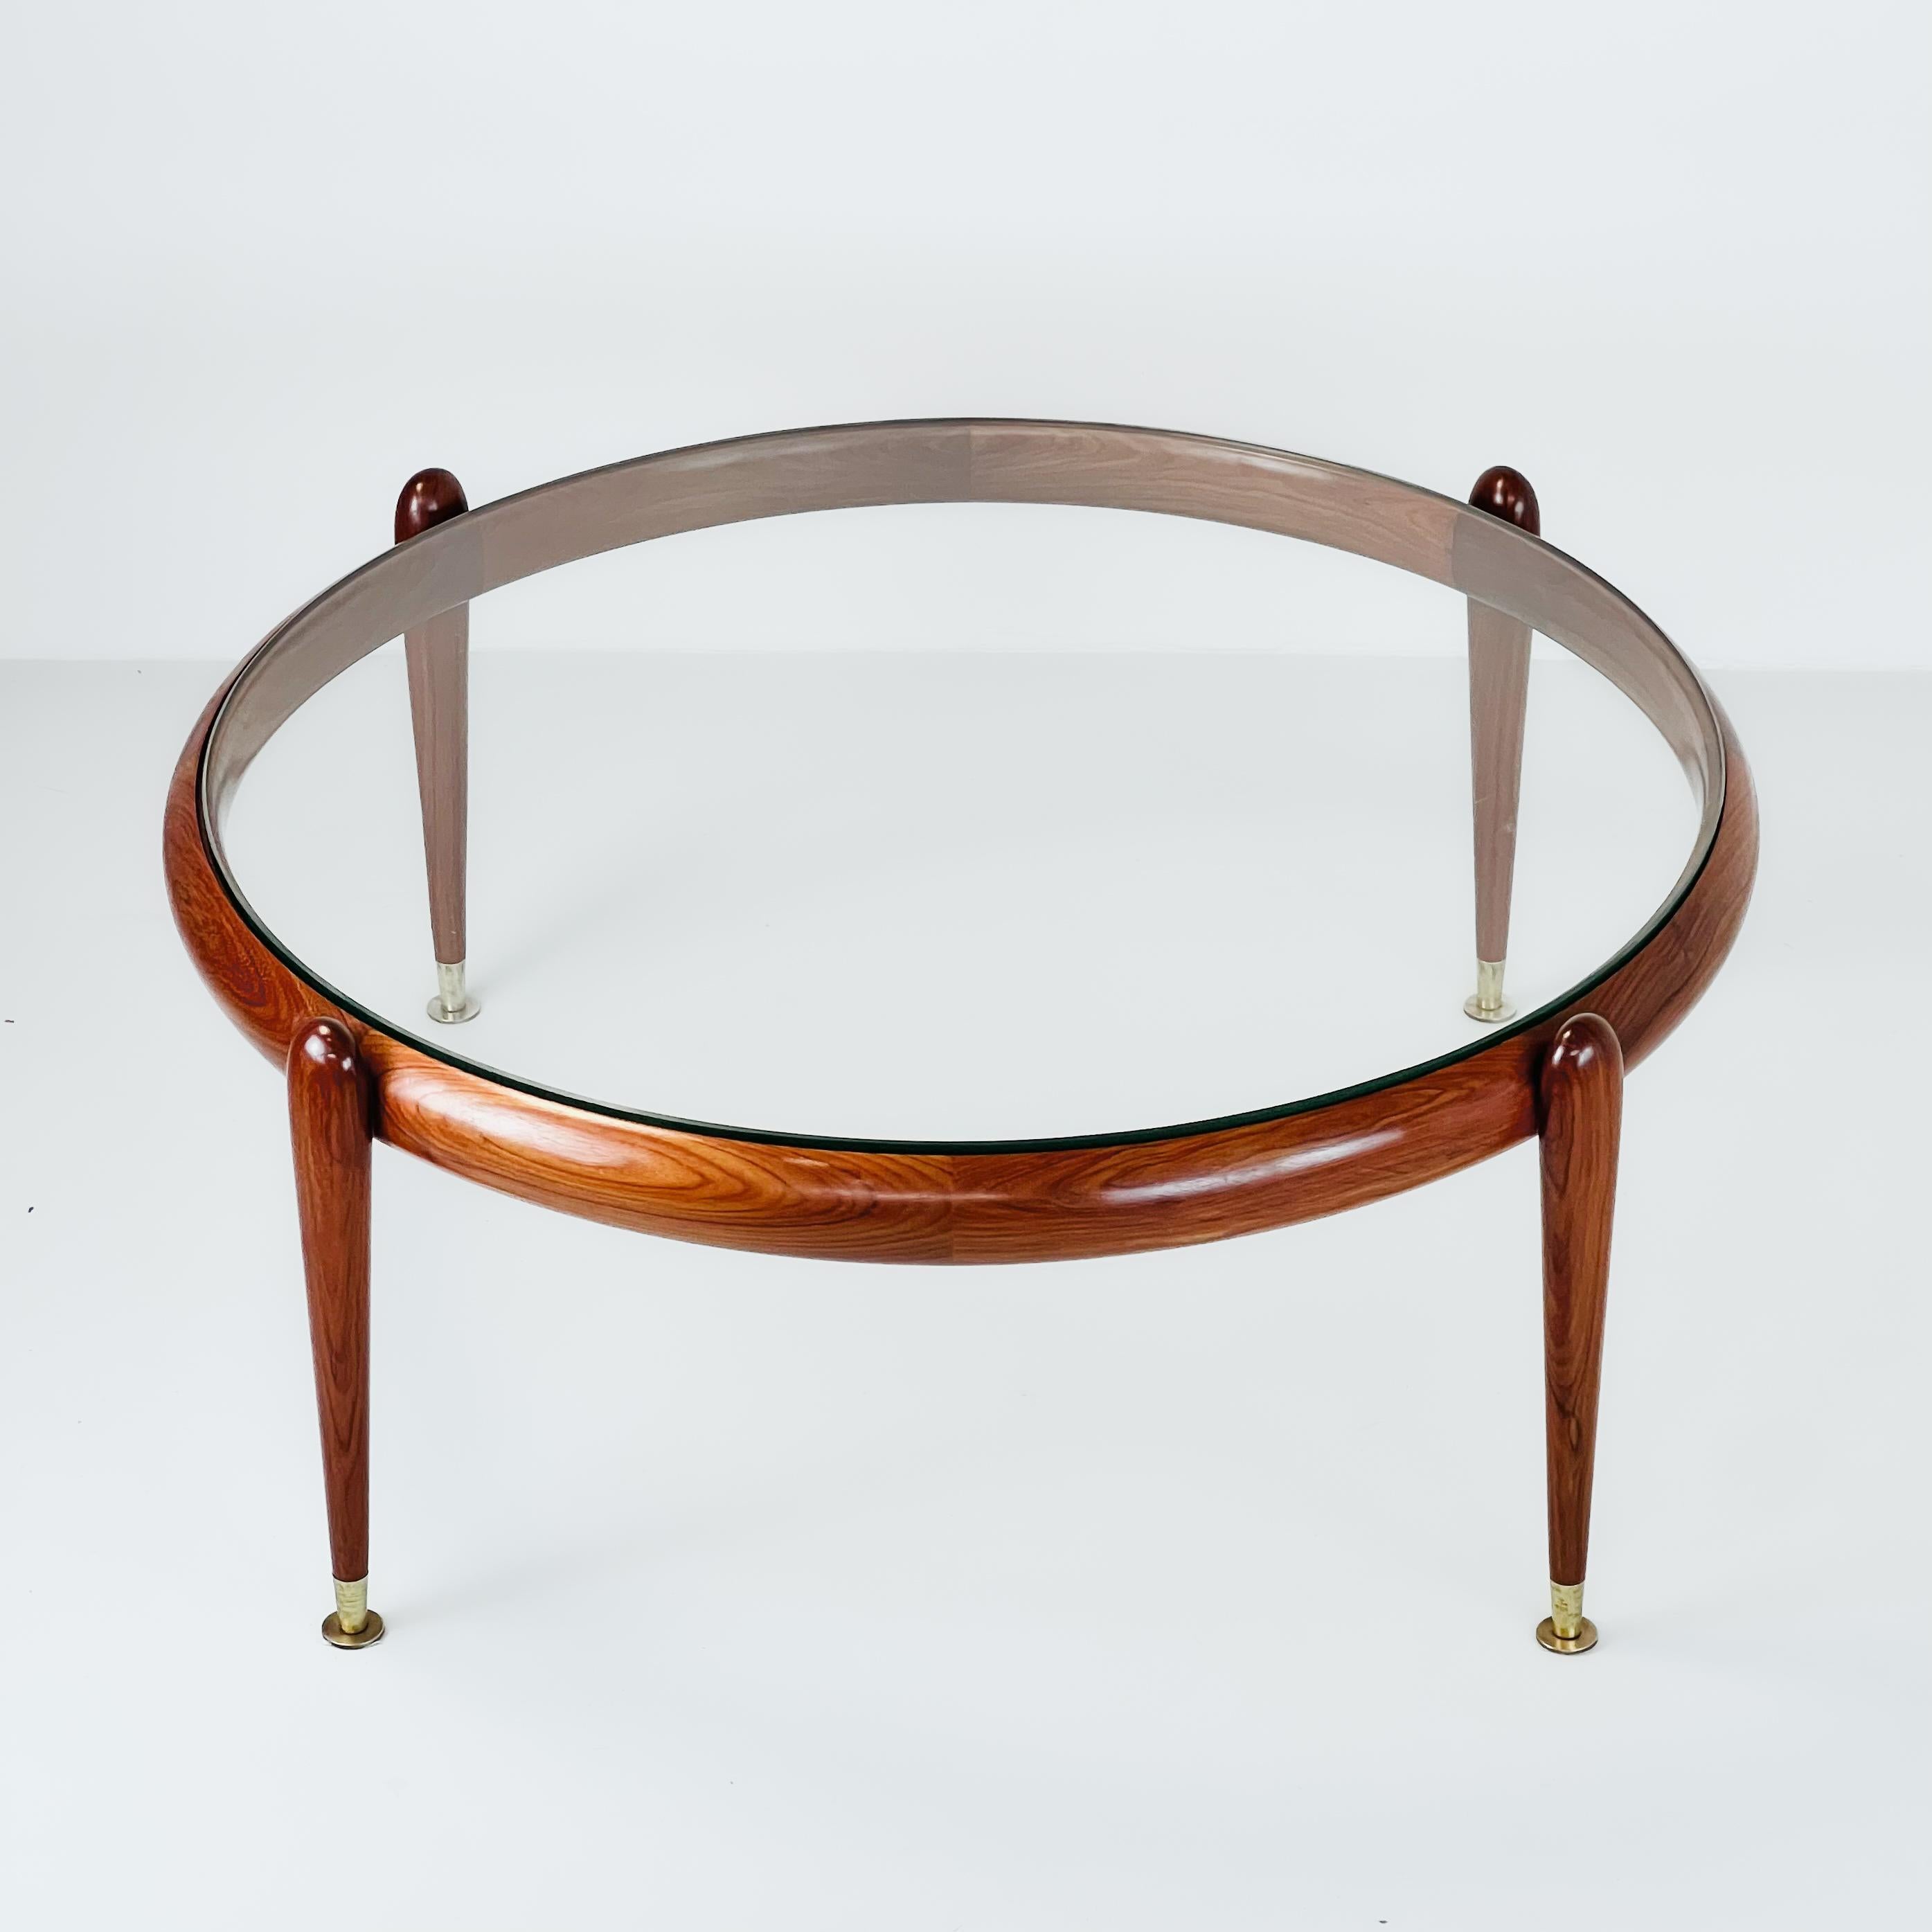 Mid-20th Century Center Table, Giussepe Scapinelli, in Caviuna Rosewood and Brass, Brazil 1960